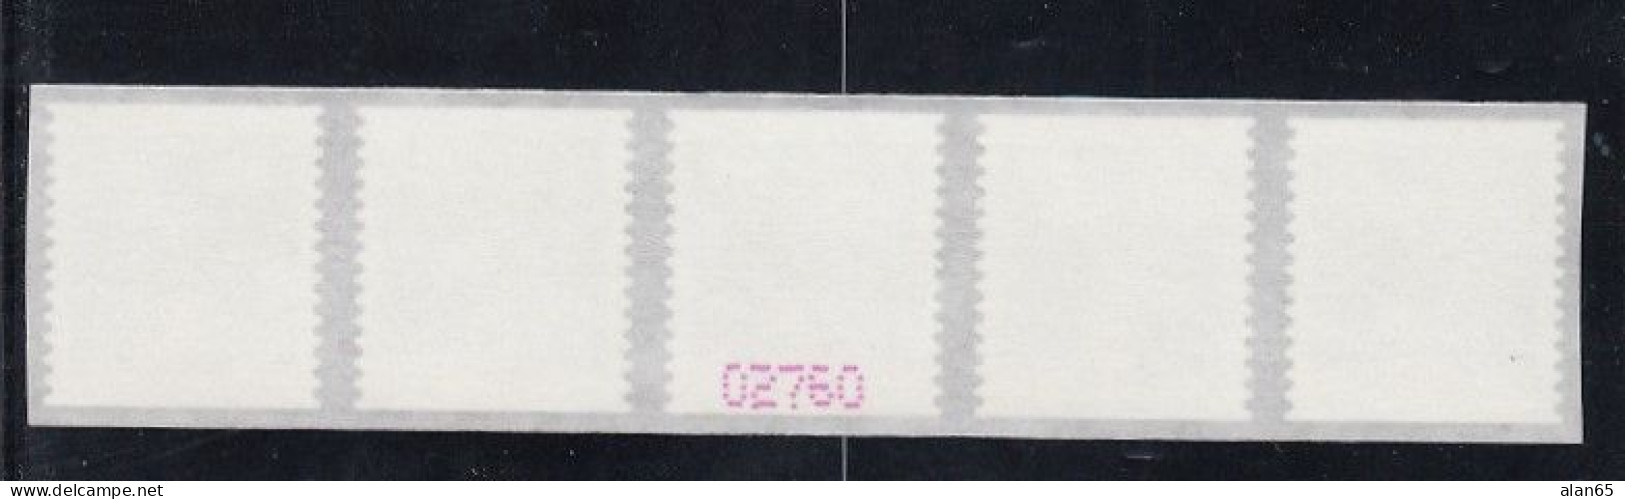 Sc#4496, Patriotic Quill And Inkwell, 2011 Issue, 44-cent Stamp Plate # Strip Of 5 - Plattennummern